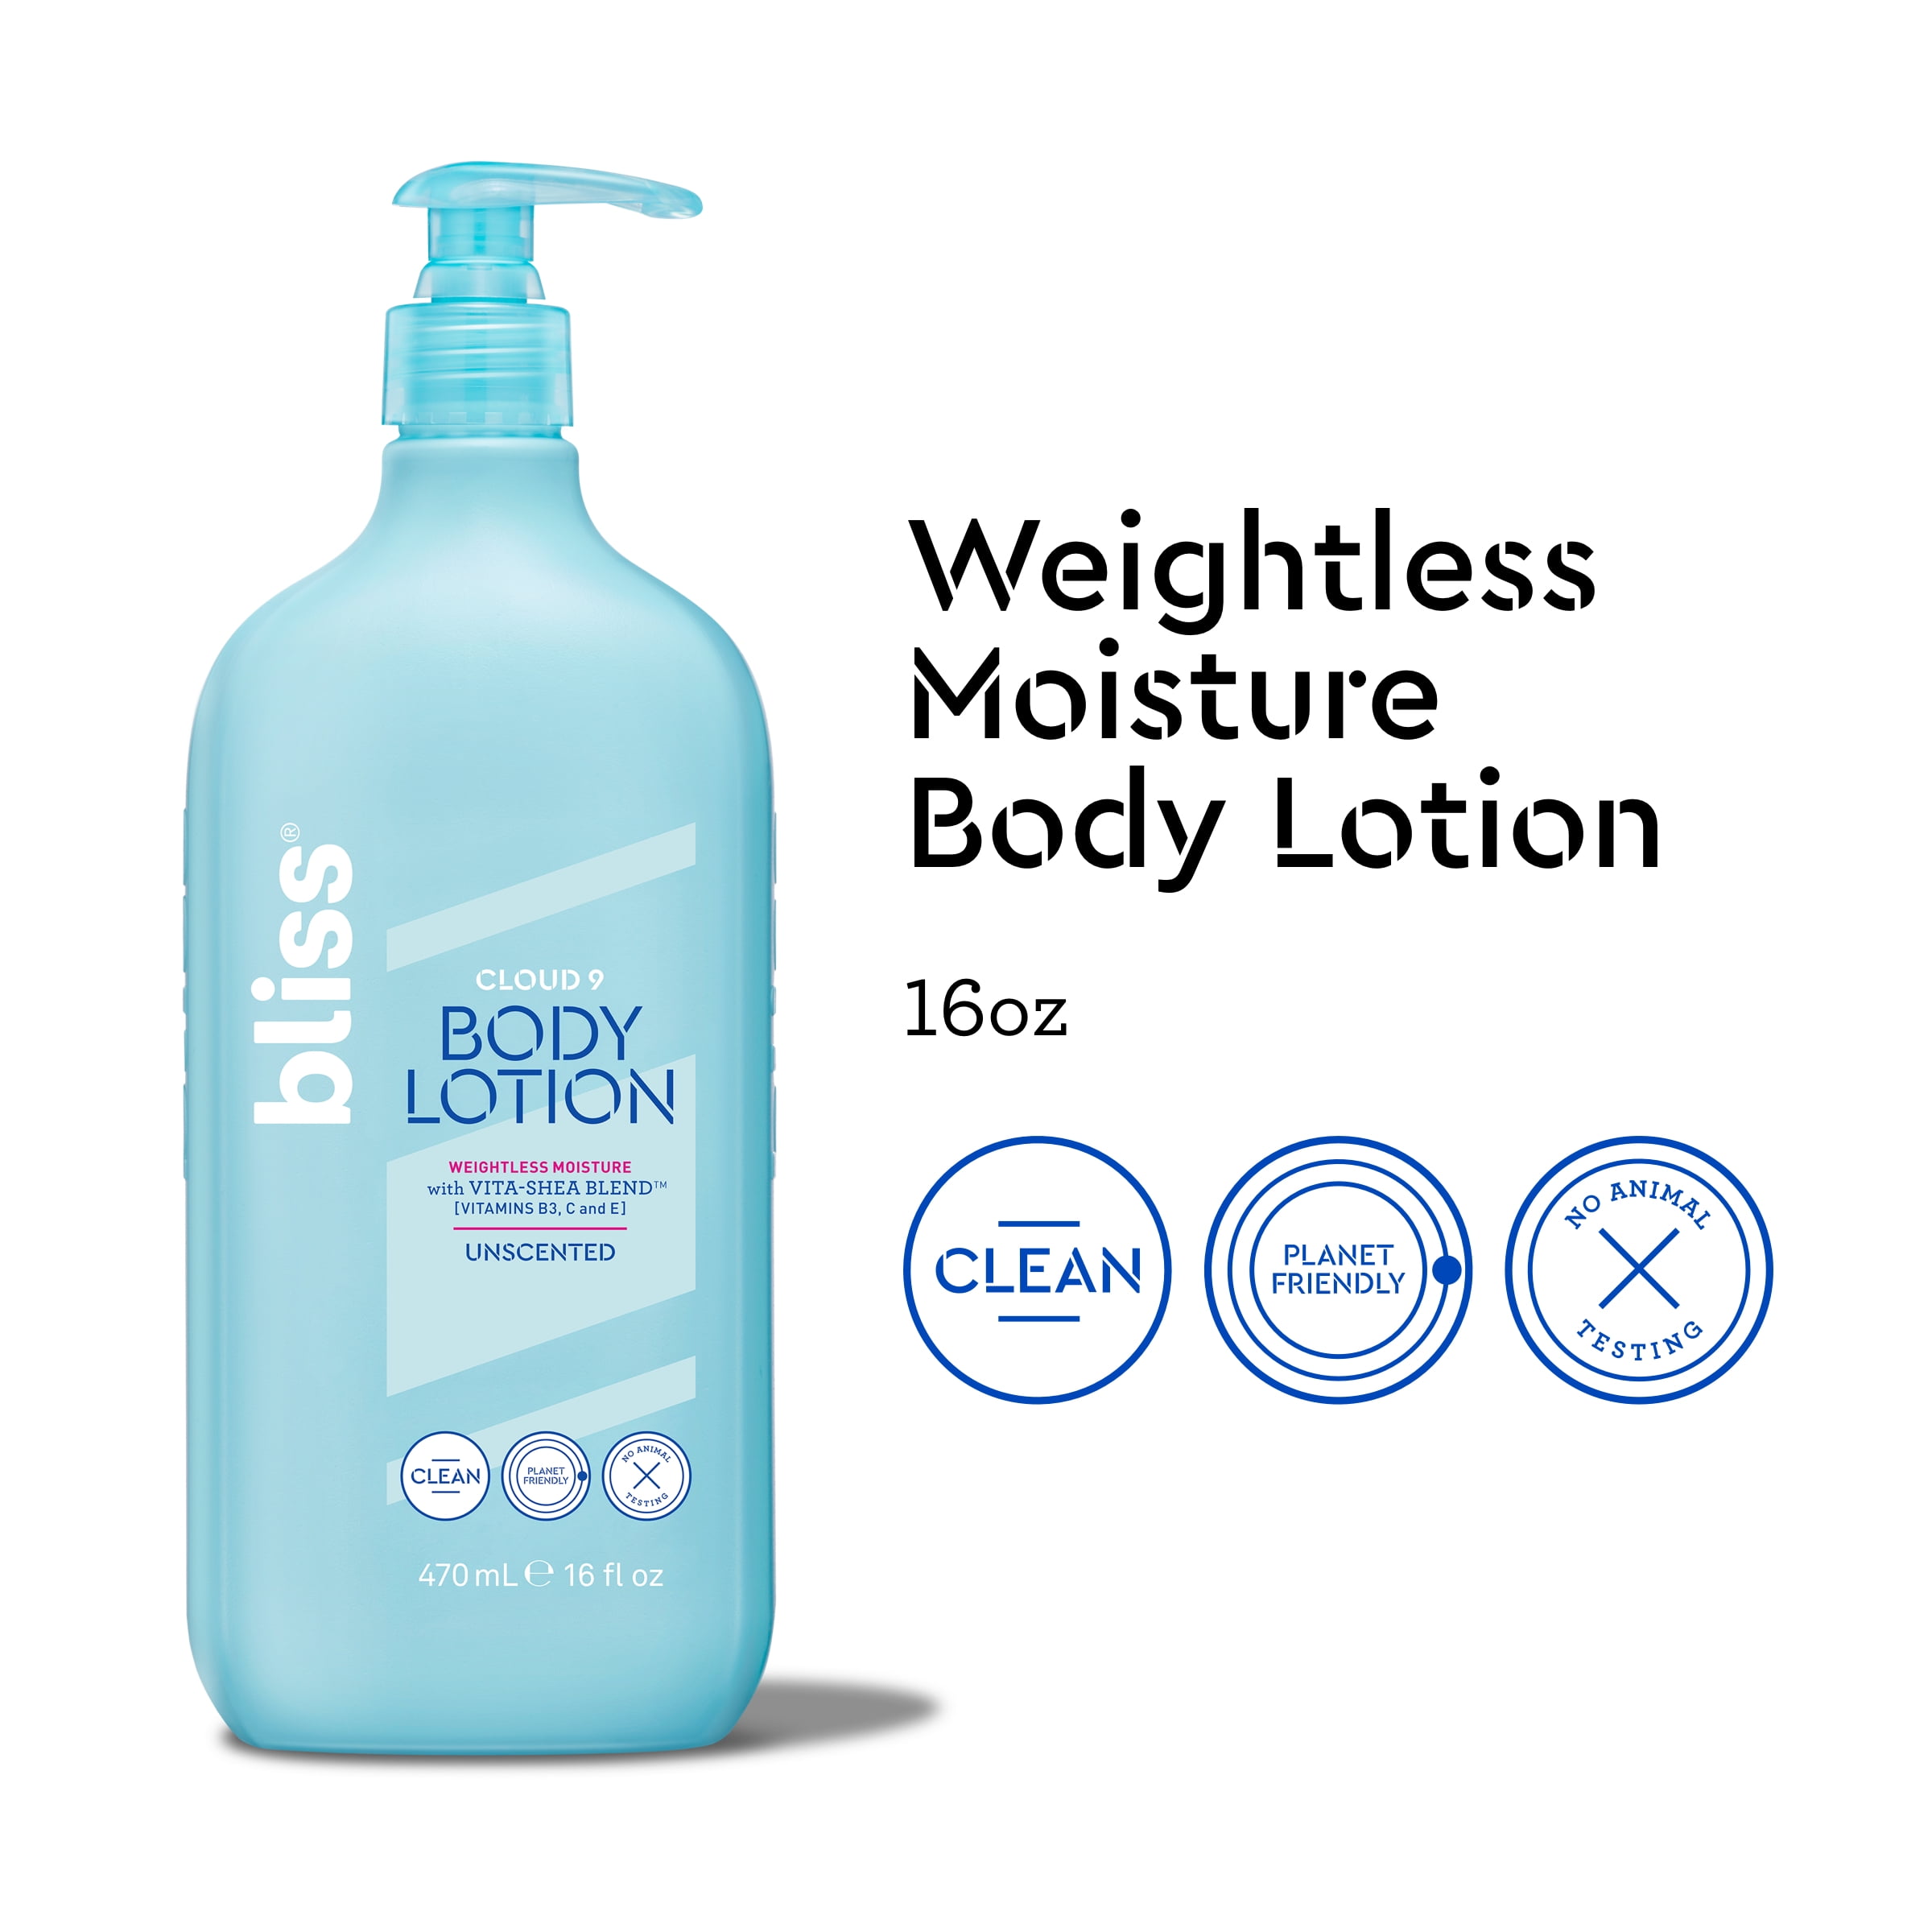 Bliss Cloud 9 Body Lotion Weightless Moisture, Unscented, 16oz